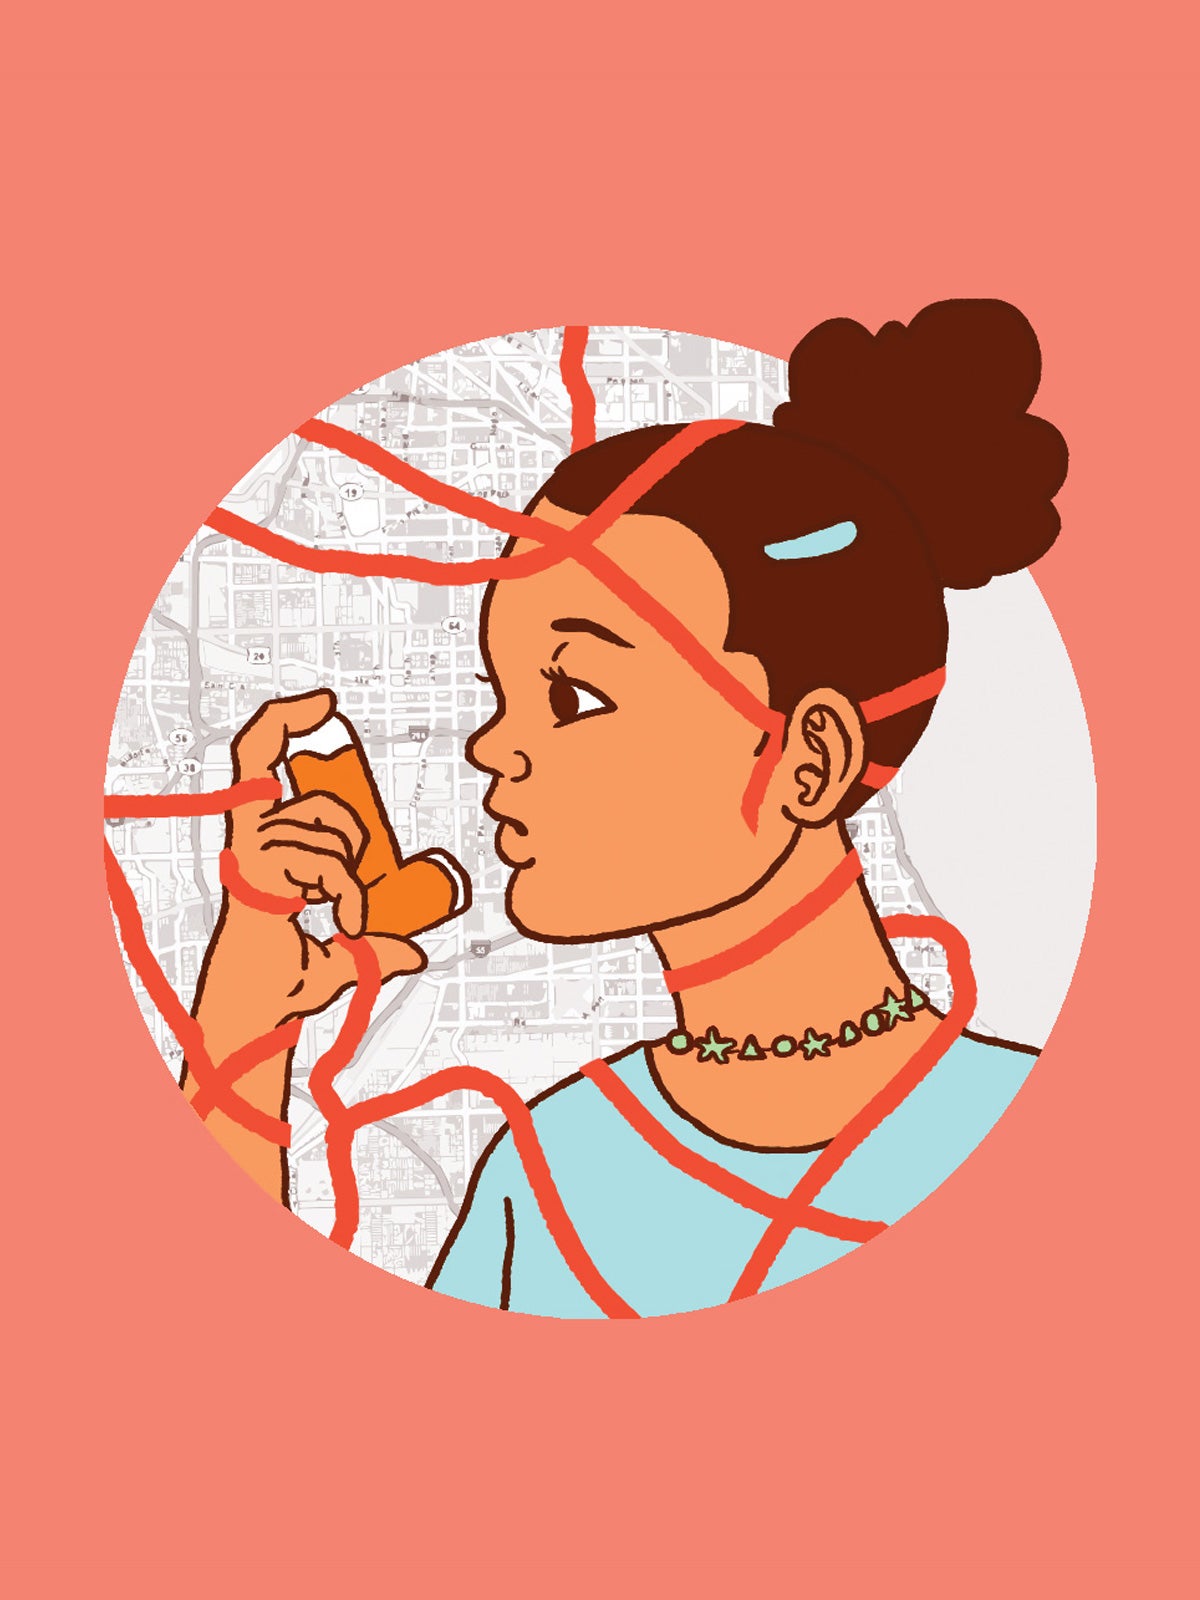 A young, brown girl with her in a bun and a blue barrette, wears a blue shirt and green beaded necklace, and holds an inhaler. She is drawn on top of a black and white city map with red lines over both the map and her figure. The drawing is on a blush background.